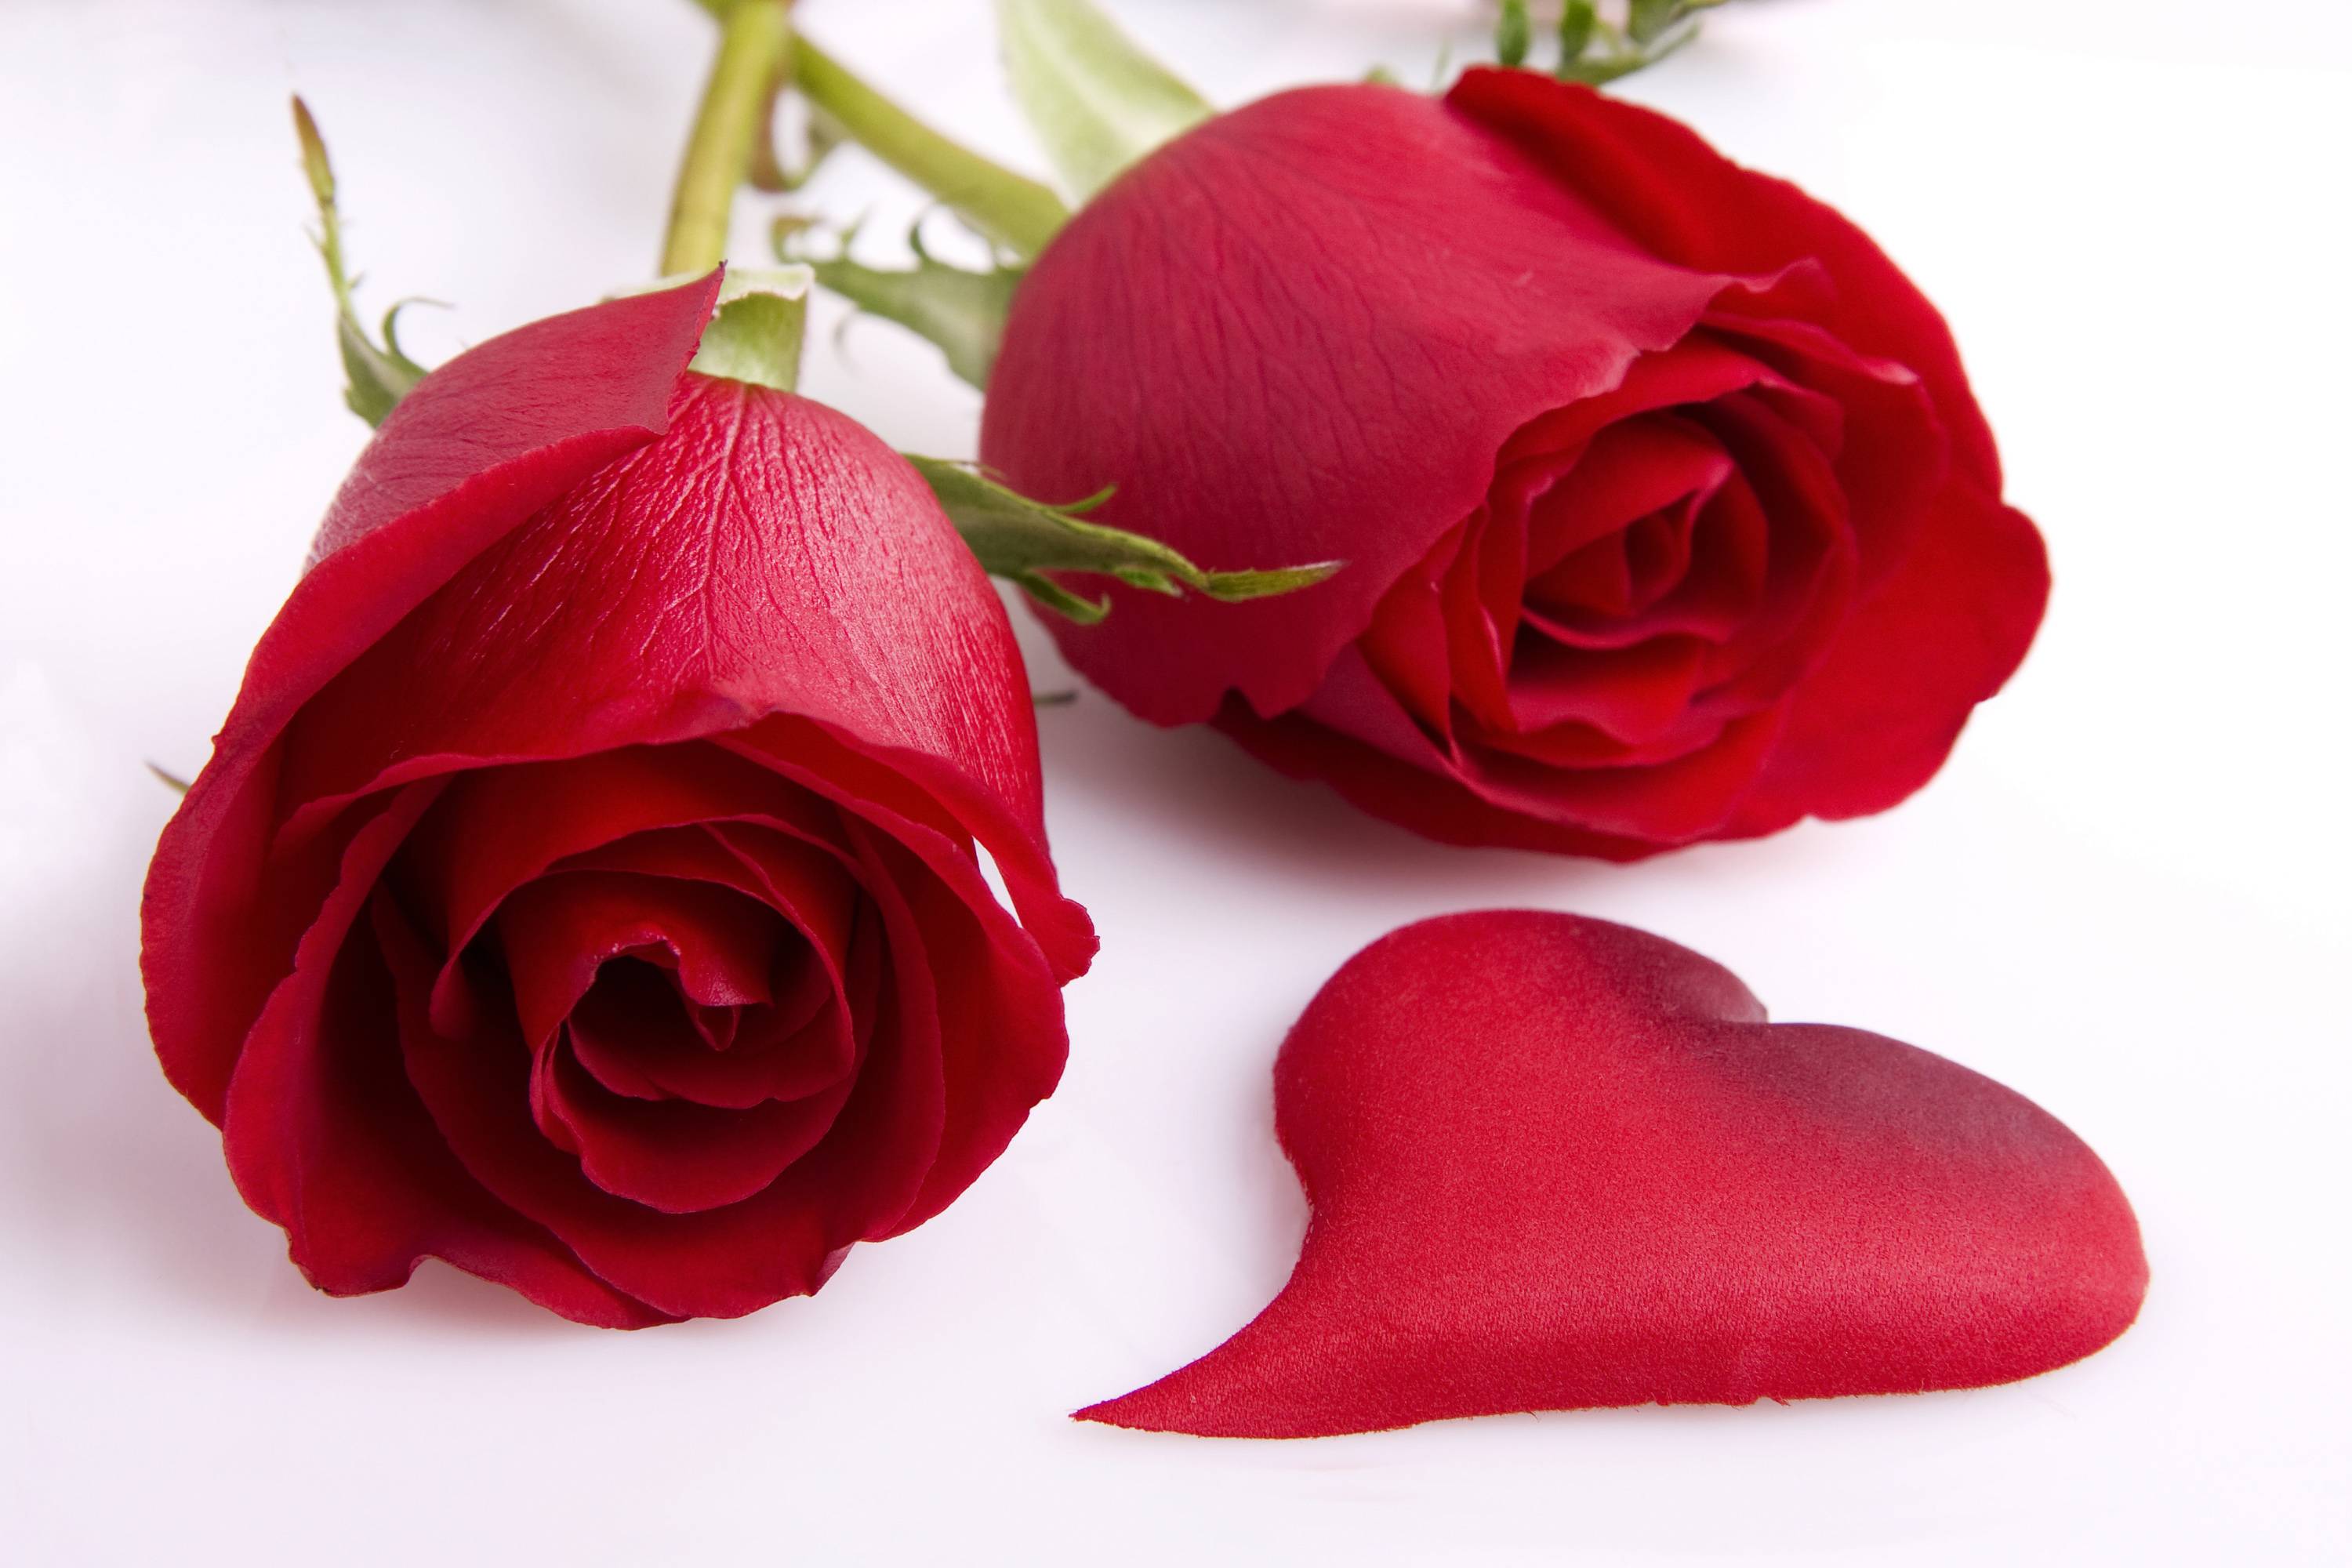 Red Rose Love Wallpapers Wallpaper Cave